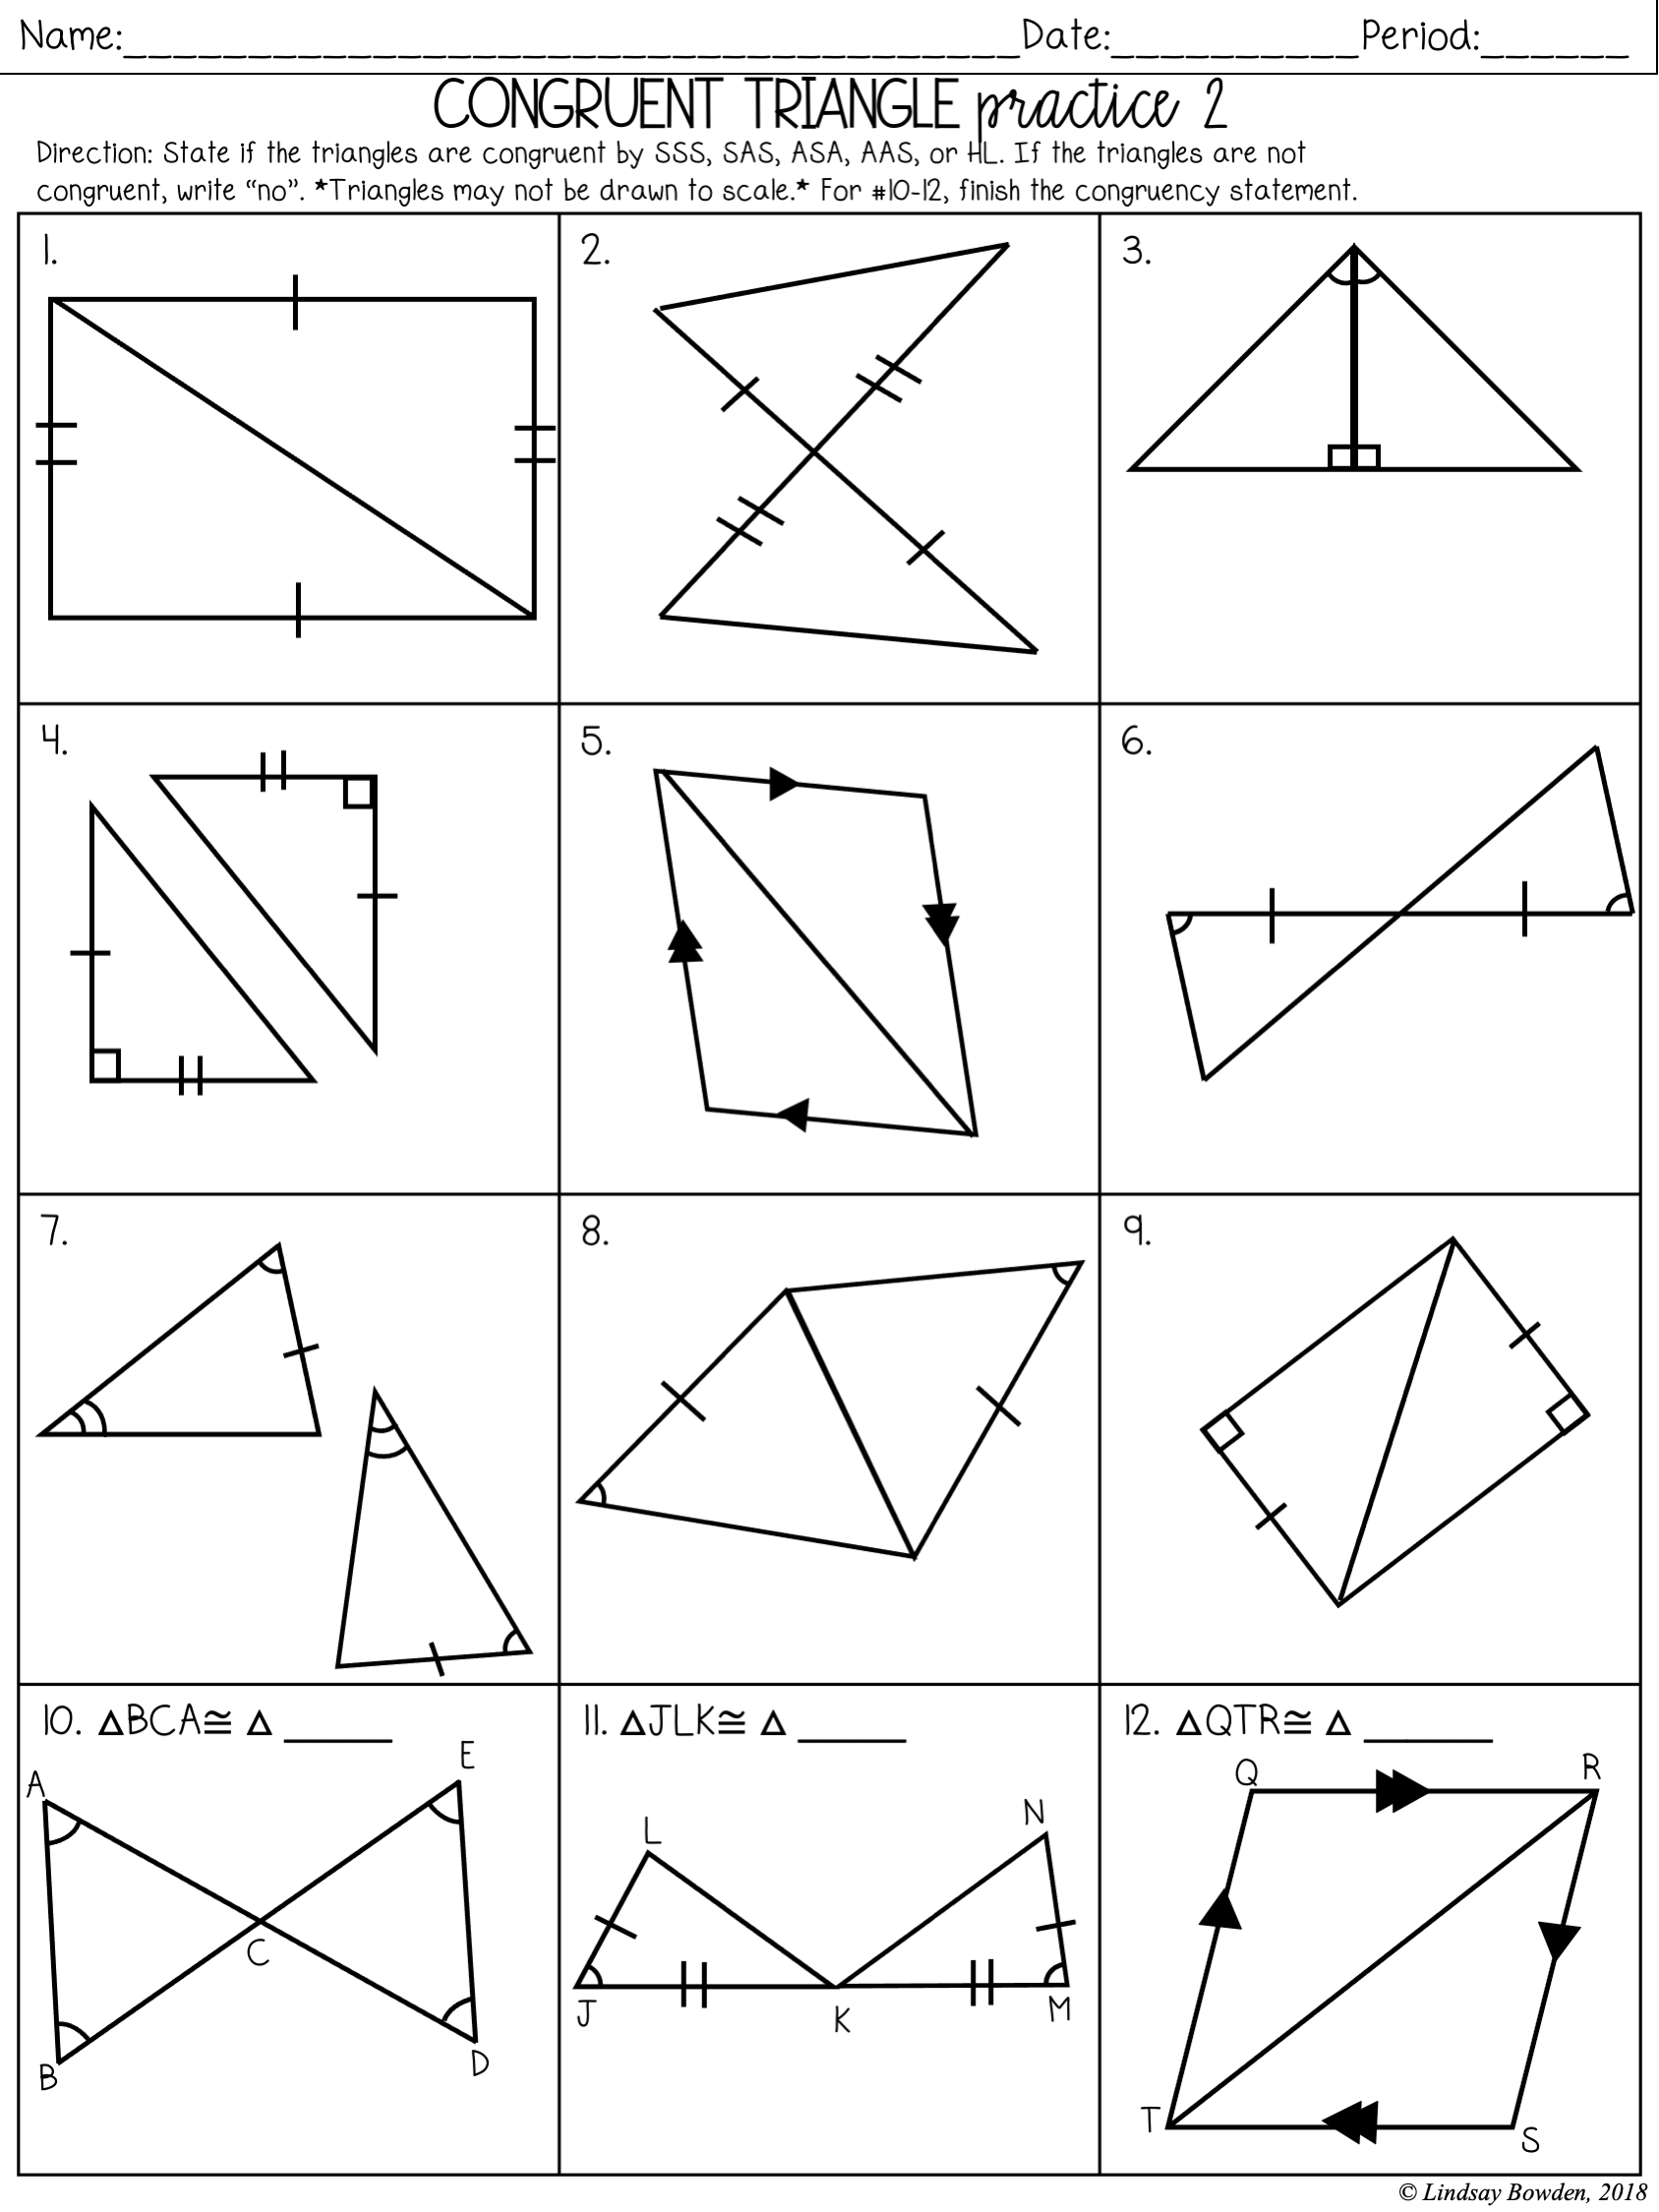 Congruent Triangles Notes and Worksheets - Lindsay Bowden With Regard To Triangle Congruence Practice Worksheet